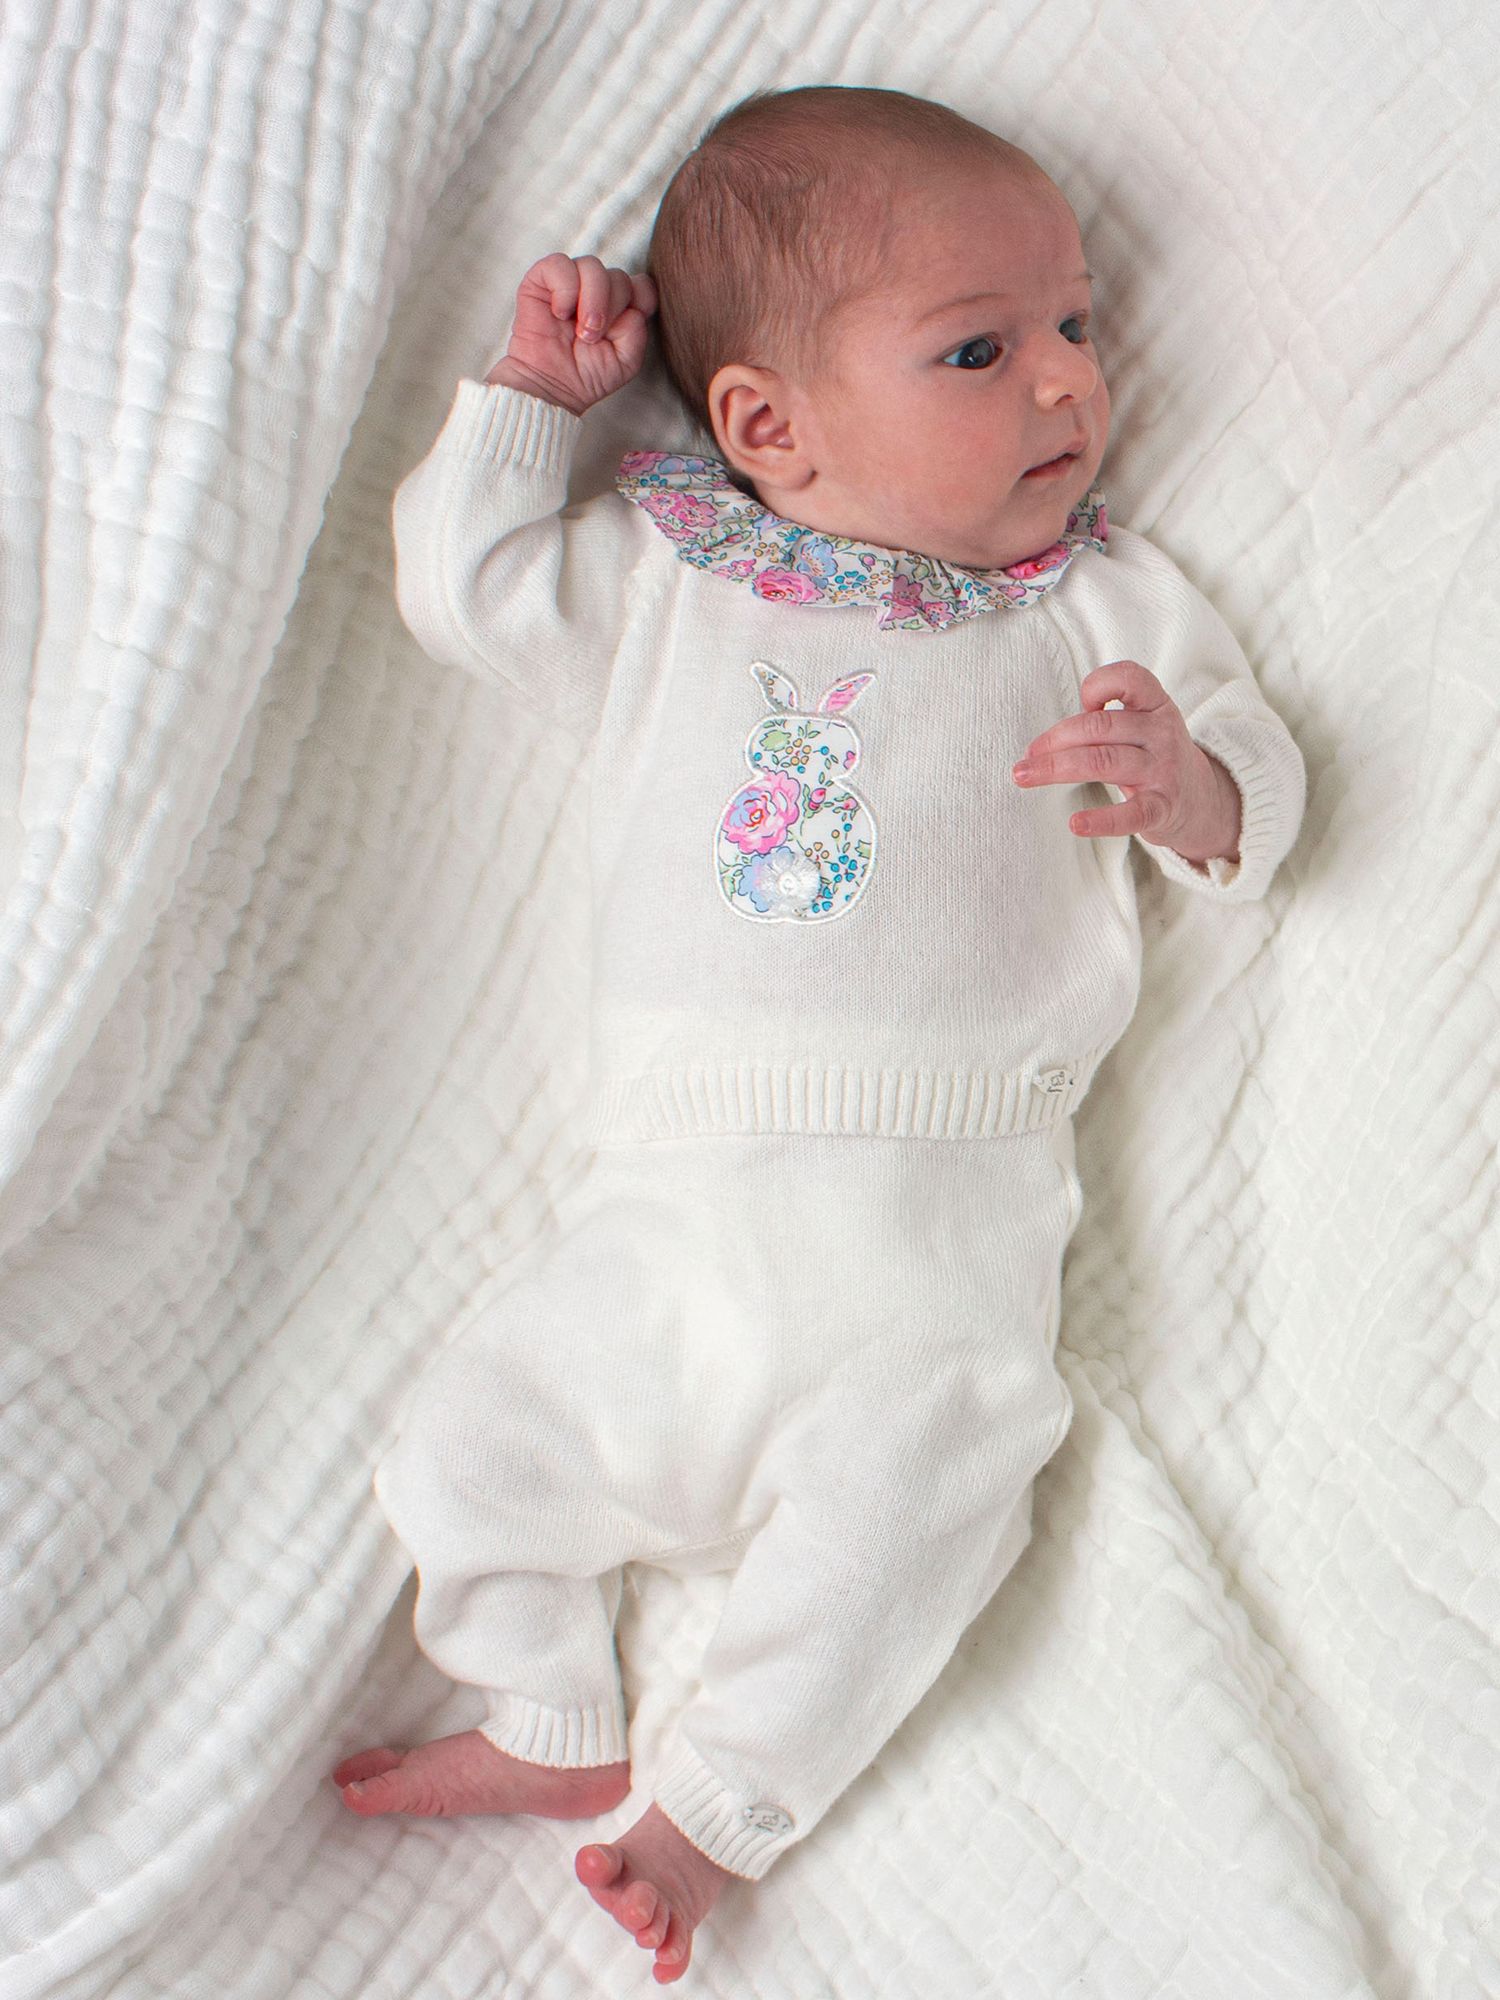 Buy Trotters Baby Felicite Bunny Wool Blend Knitted Set, White/Pink Online at johnlewis.com